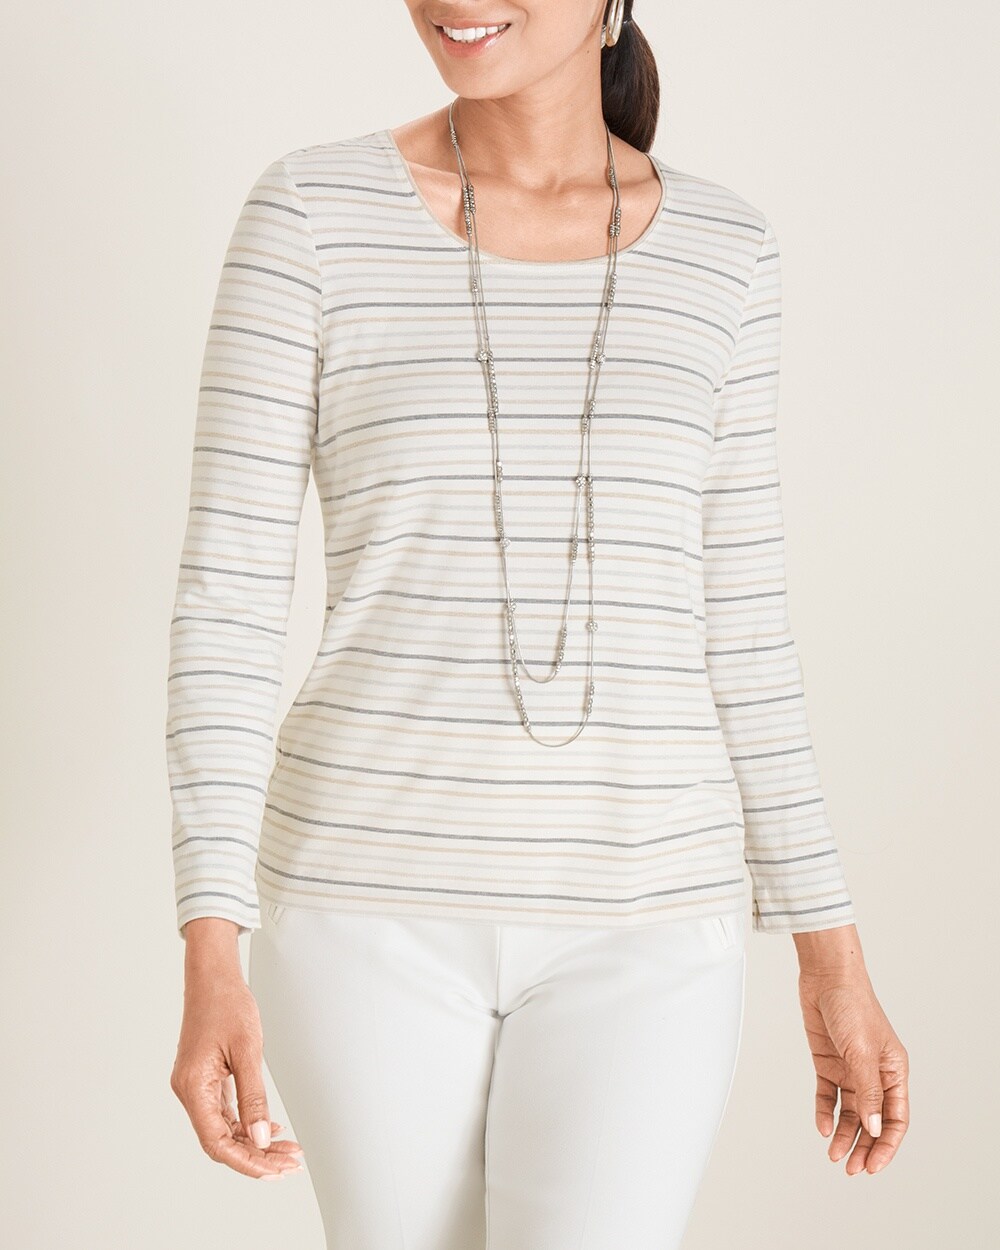 Touch of Cool Ombre Striped Layering Tee